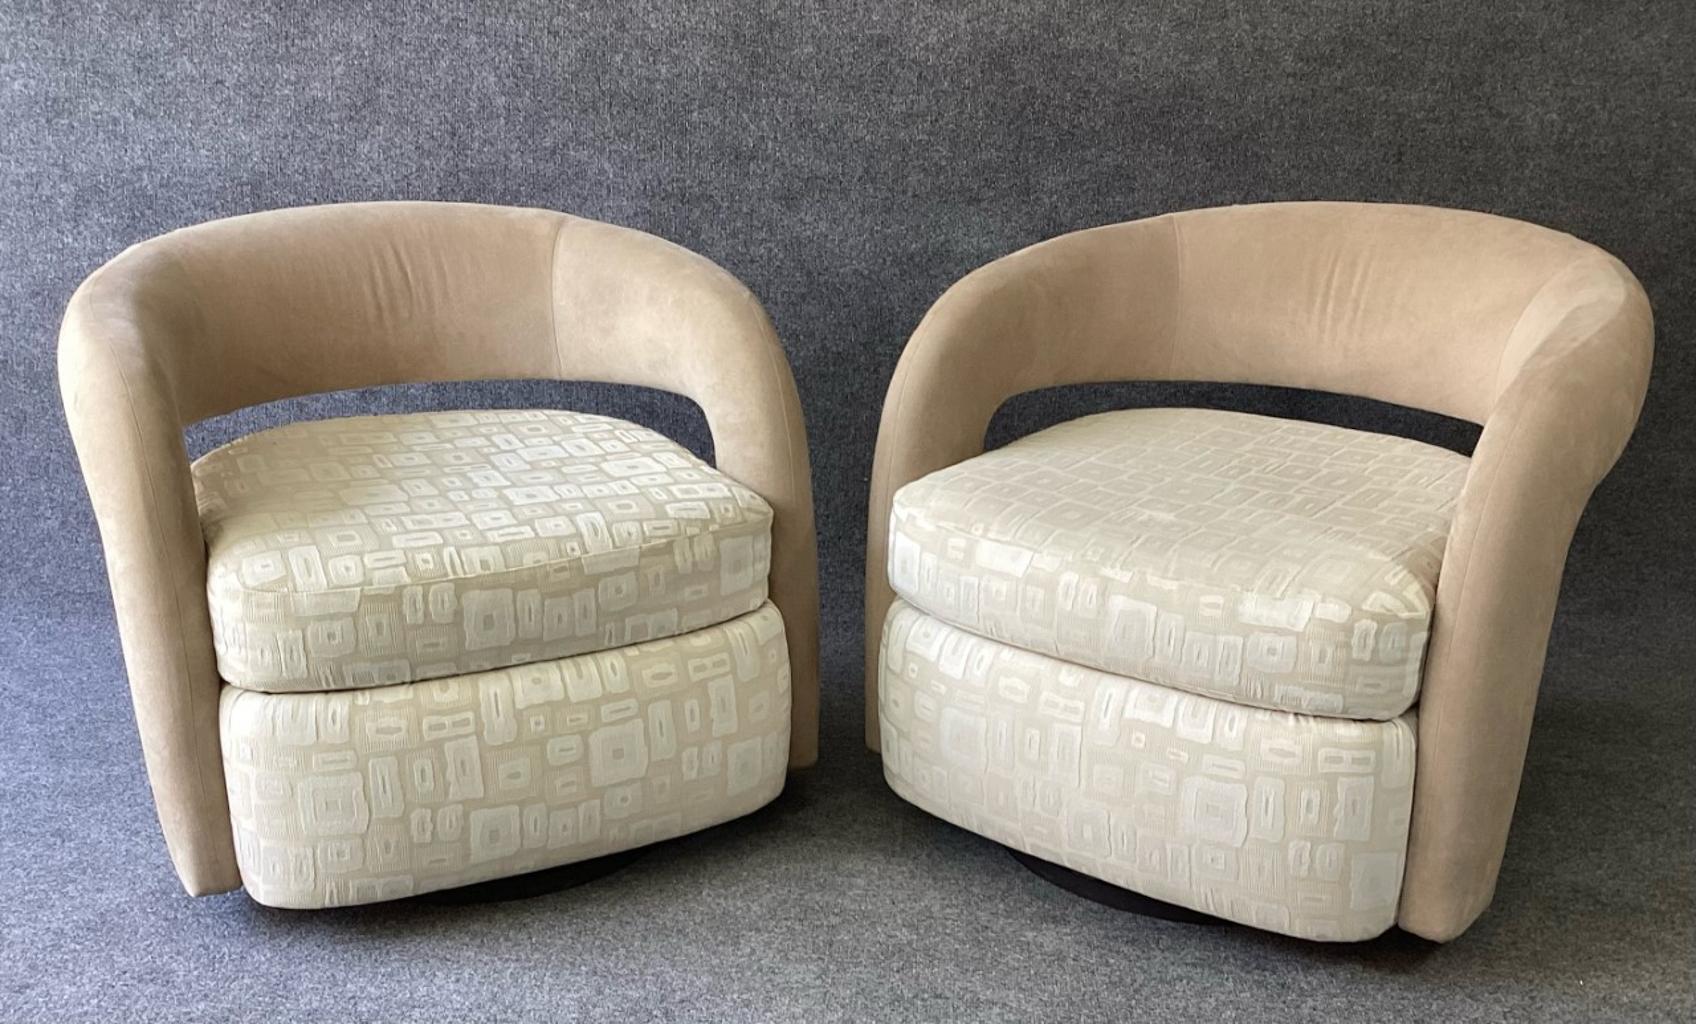 A very nice pair of super comfy and original fabric Targa swivel lounge chairs by Weiman. Both chairs have spring loaded wood bases. So each chair returns to the desired resting position. Notice the loose pillow and floating back/arm. As sleek as